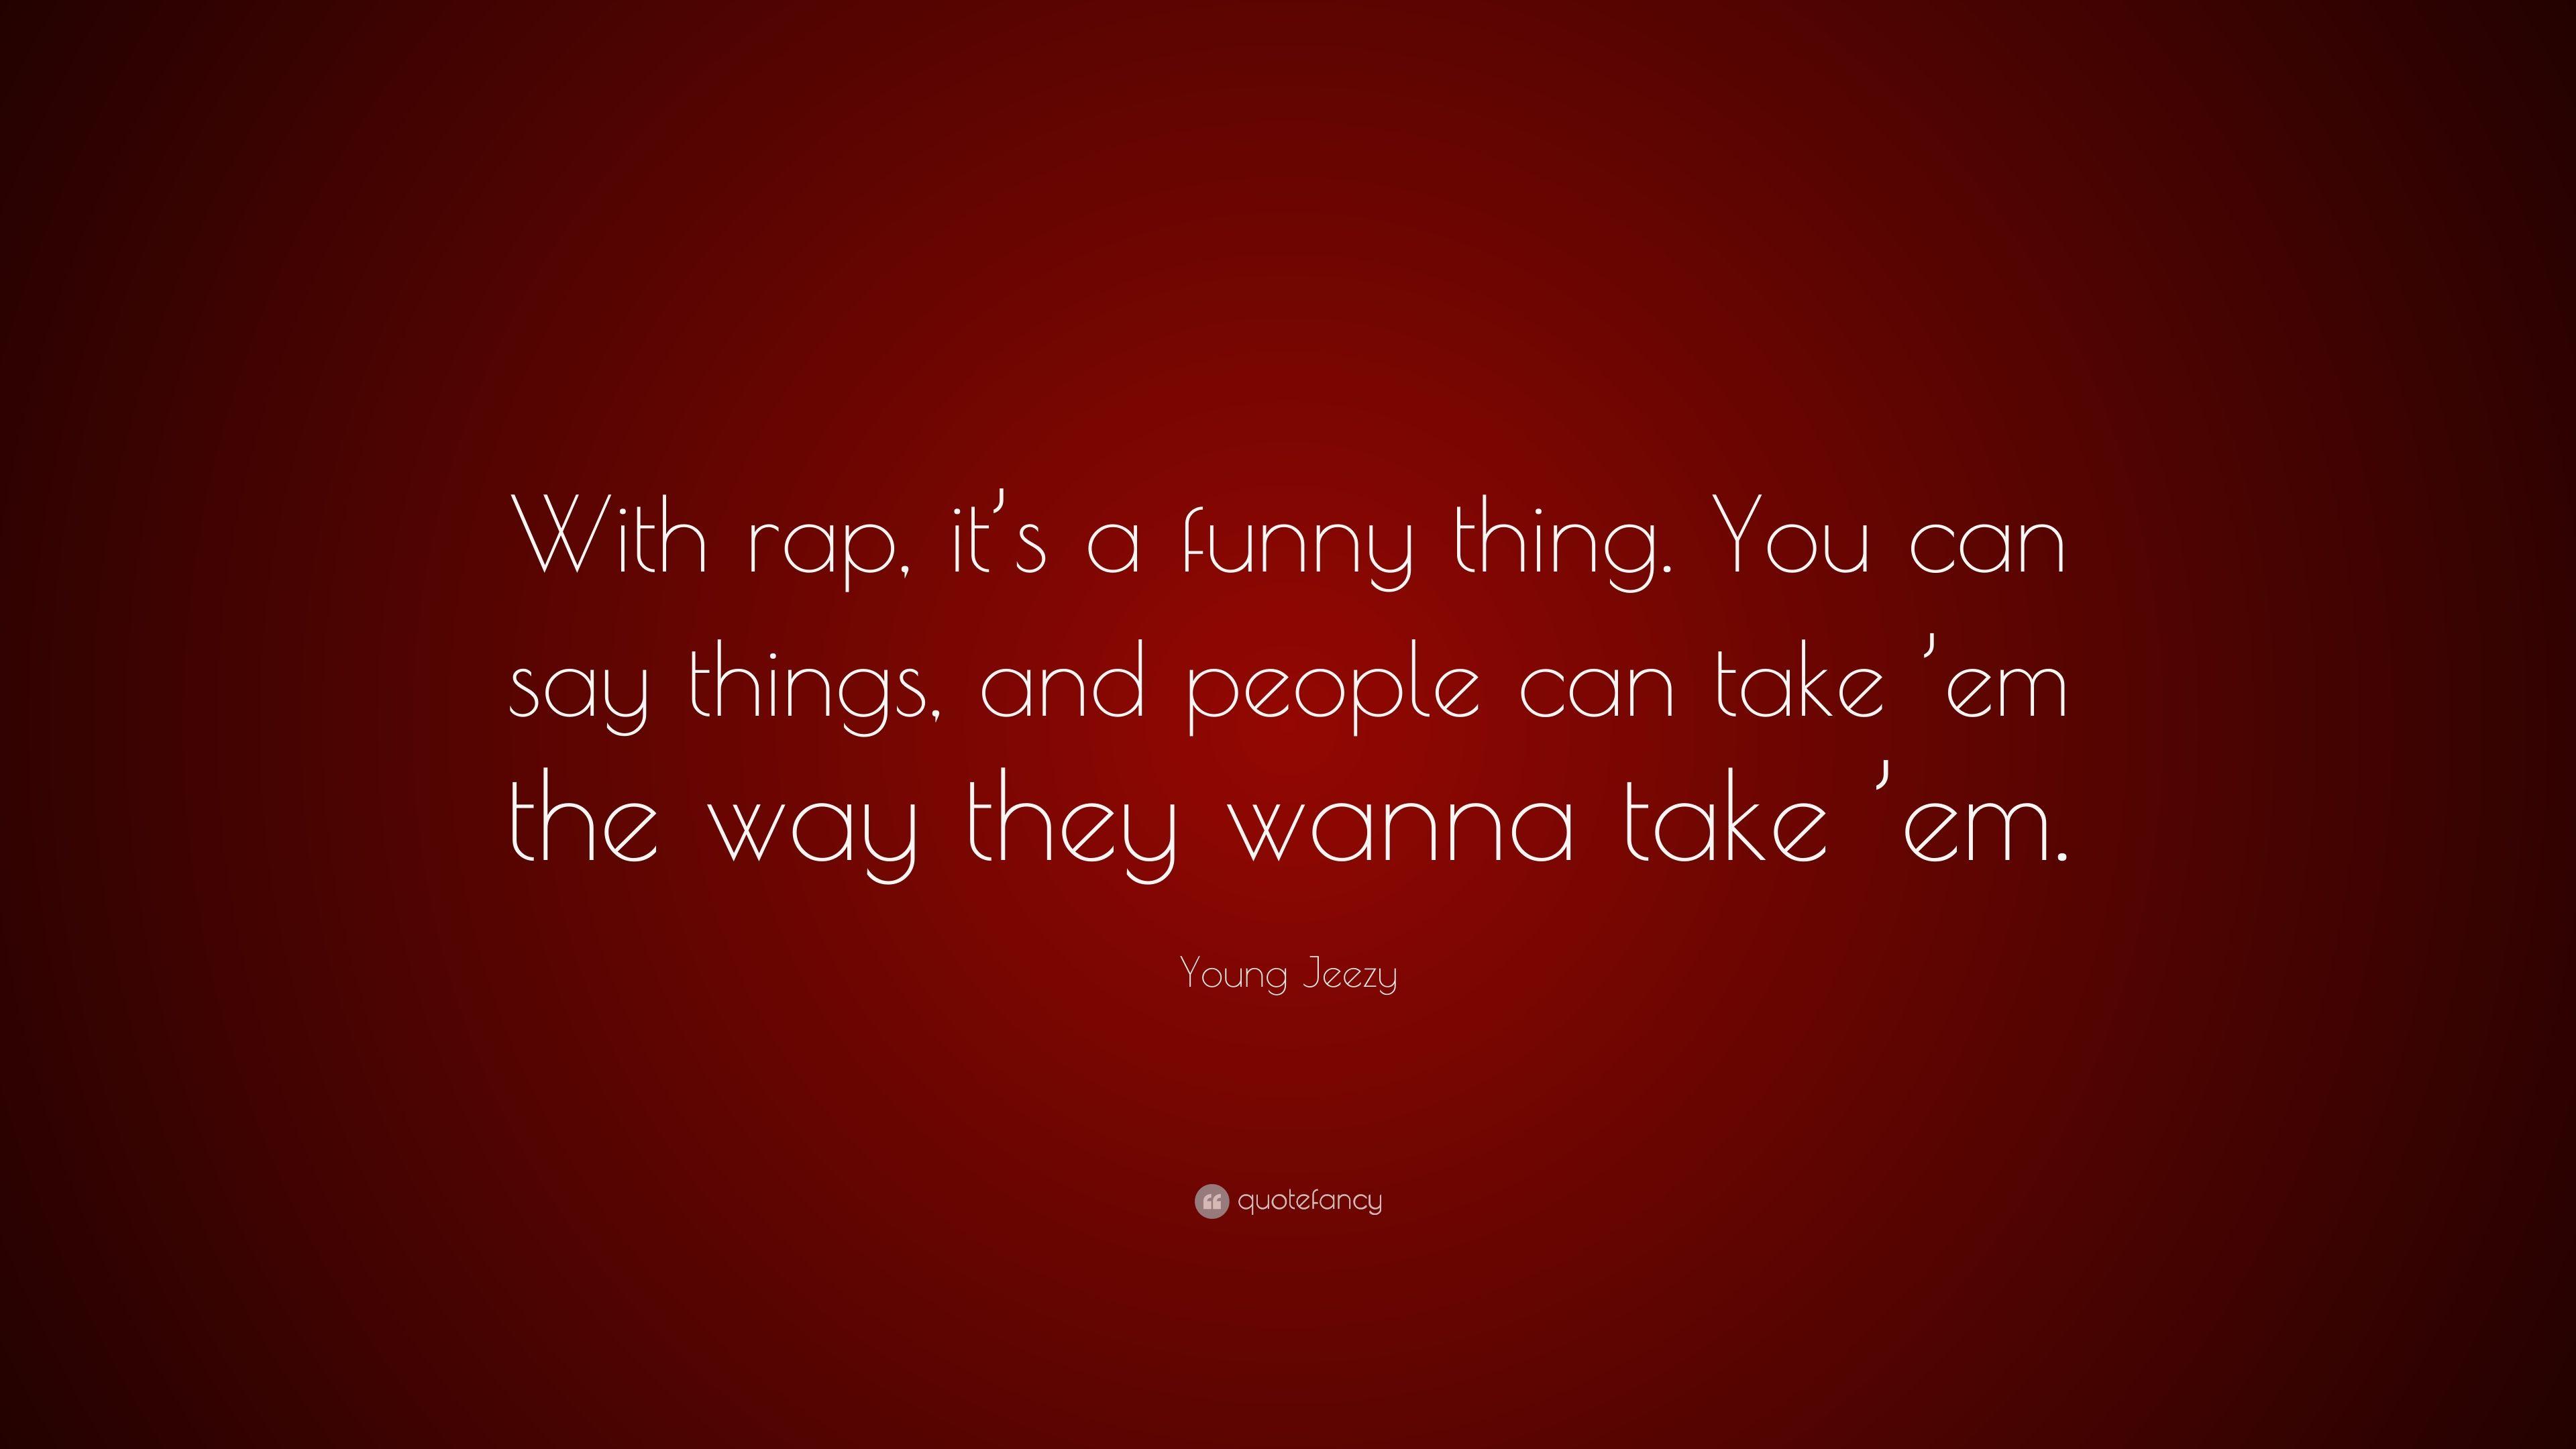 Young Jeezy Quote: “With rap, it's a funny thing. You can say things